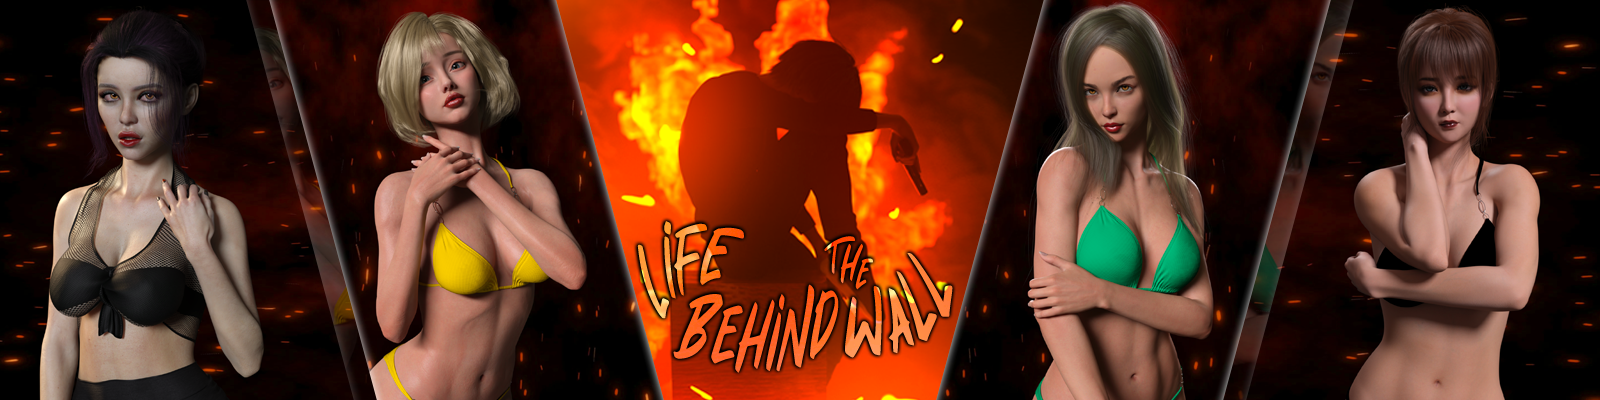 Life Behind The Wall poster